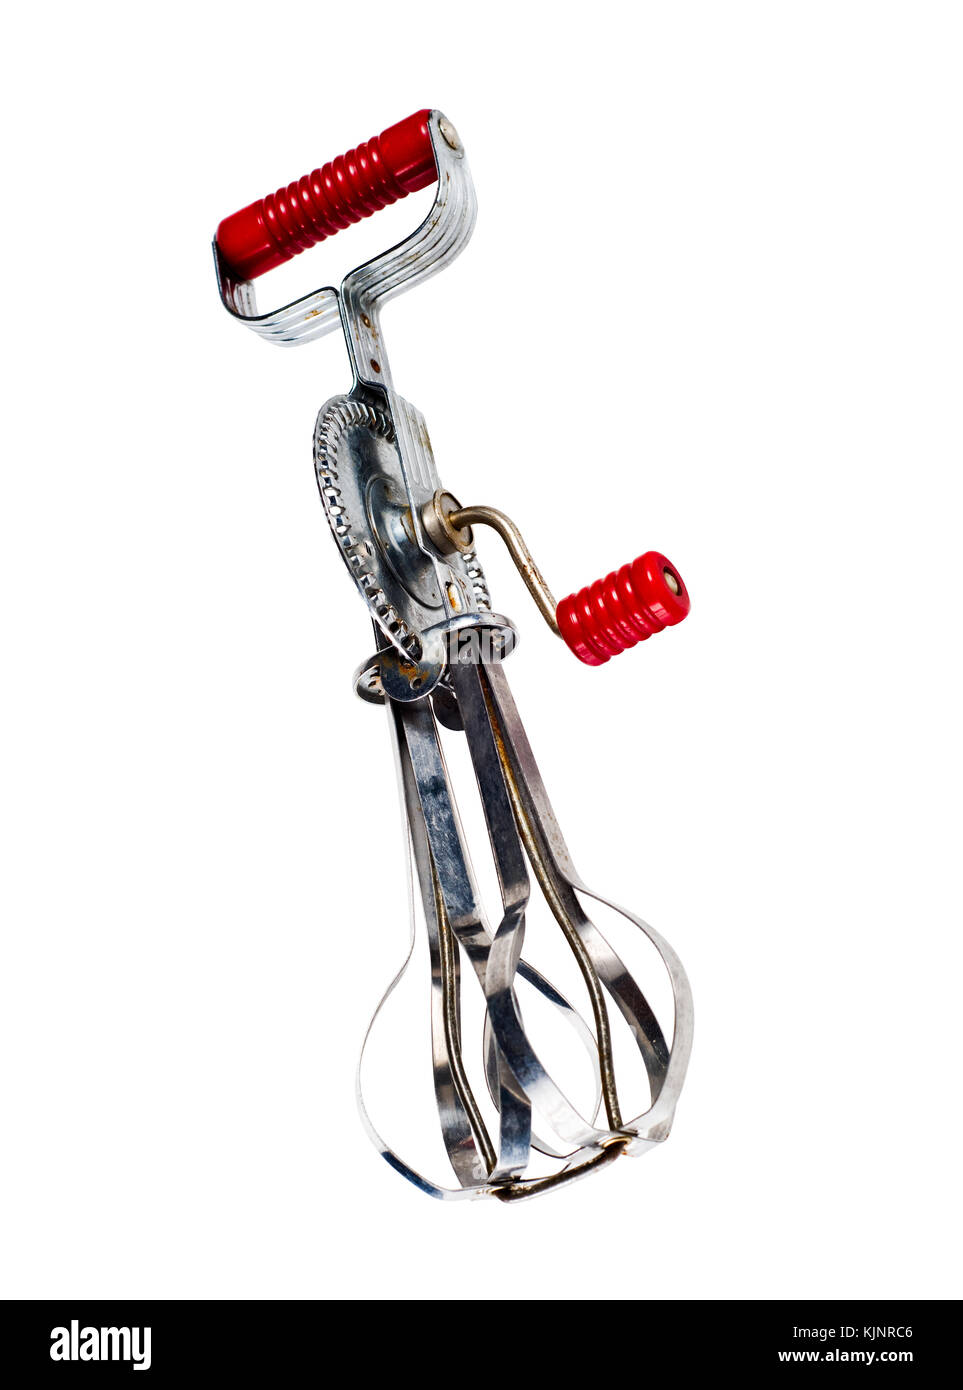 https://c8.alamy.com/comp/KJNRC6/vintage-egg-beater-operated-without-the-use-of-electricity-KJNRC6.jpg